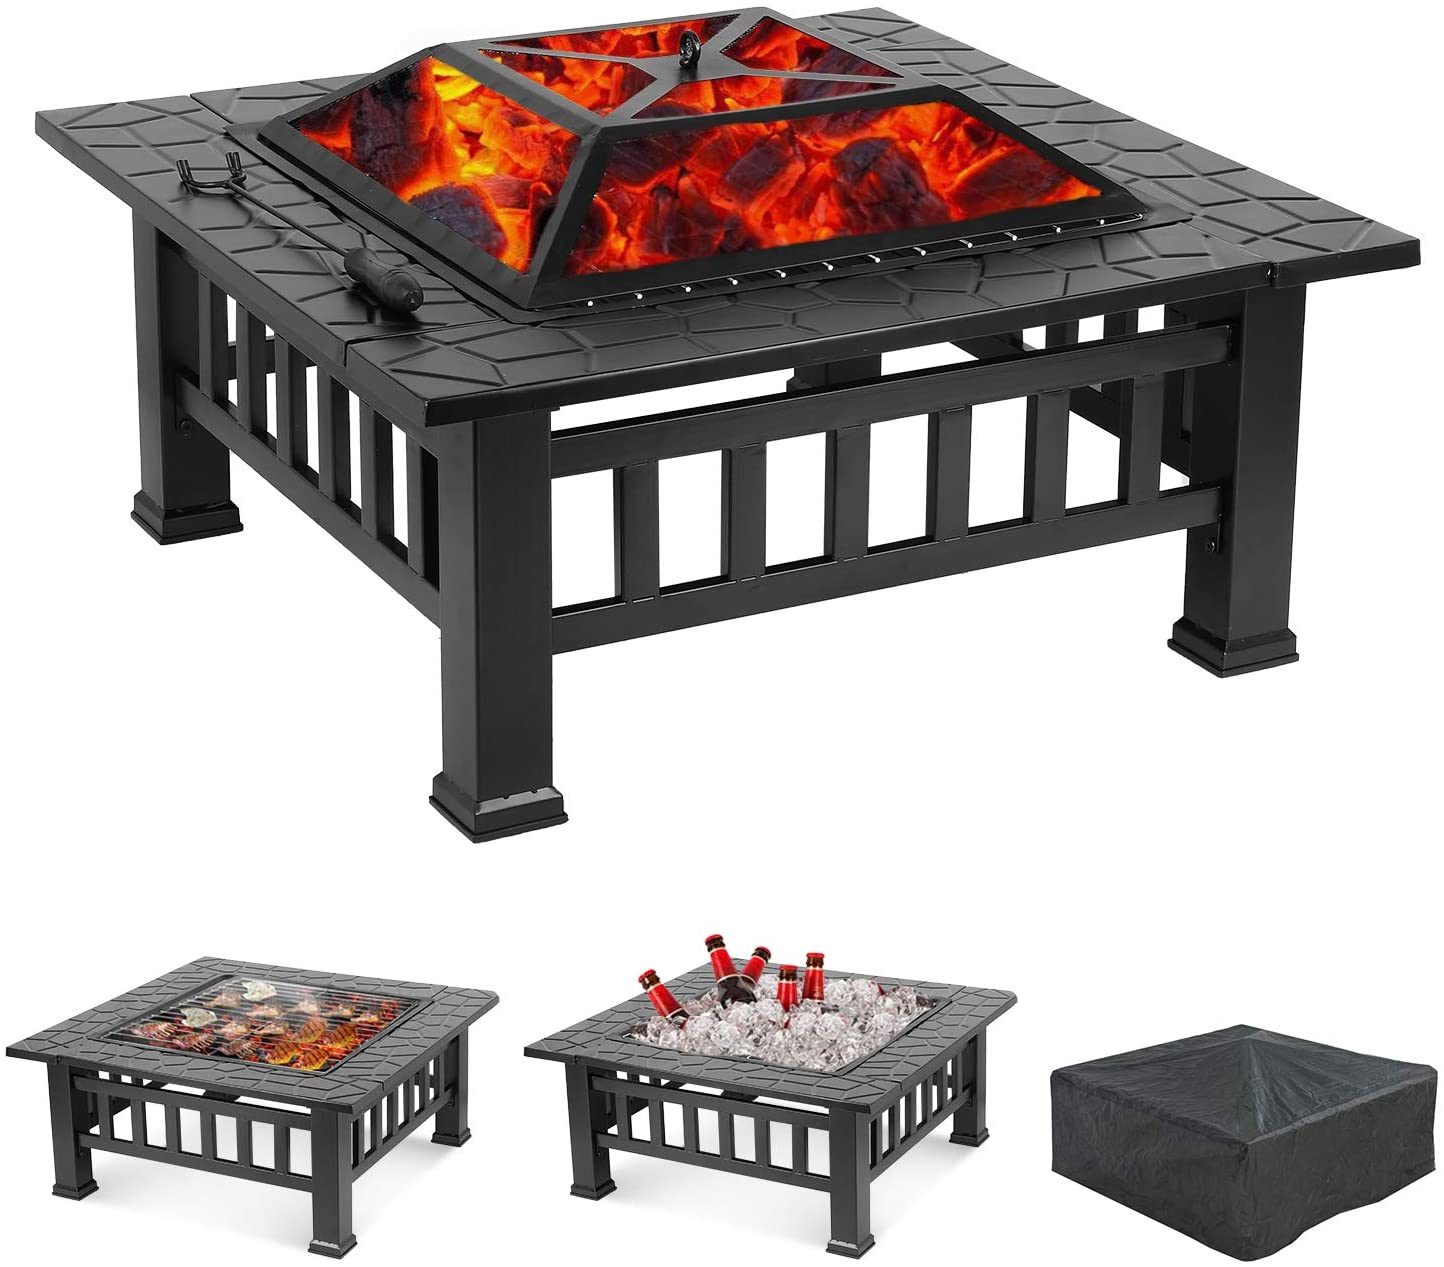 Upland Fire Pit with Cover